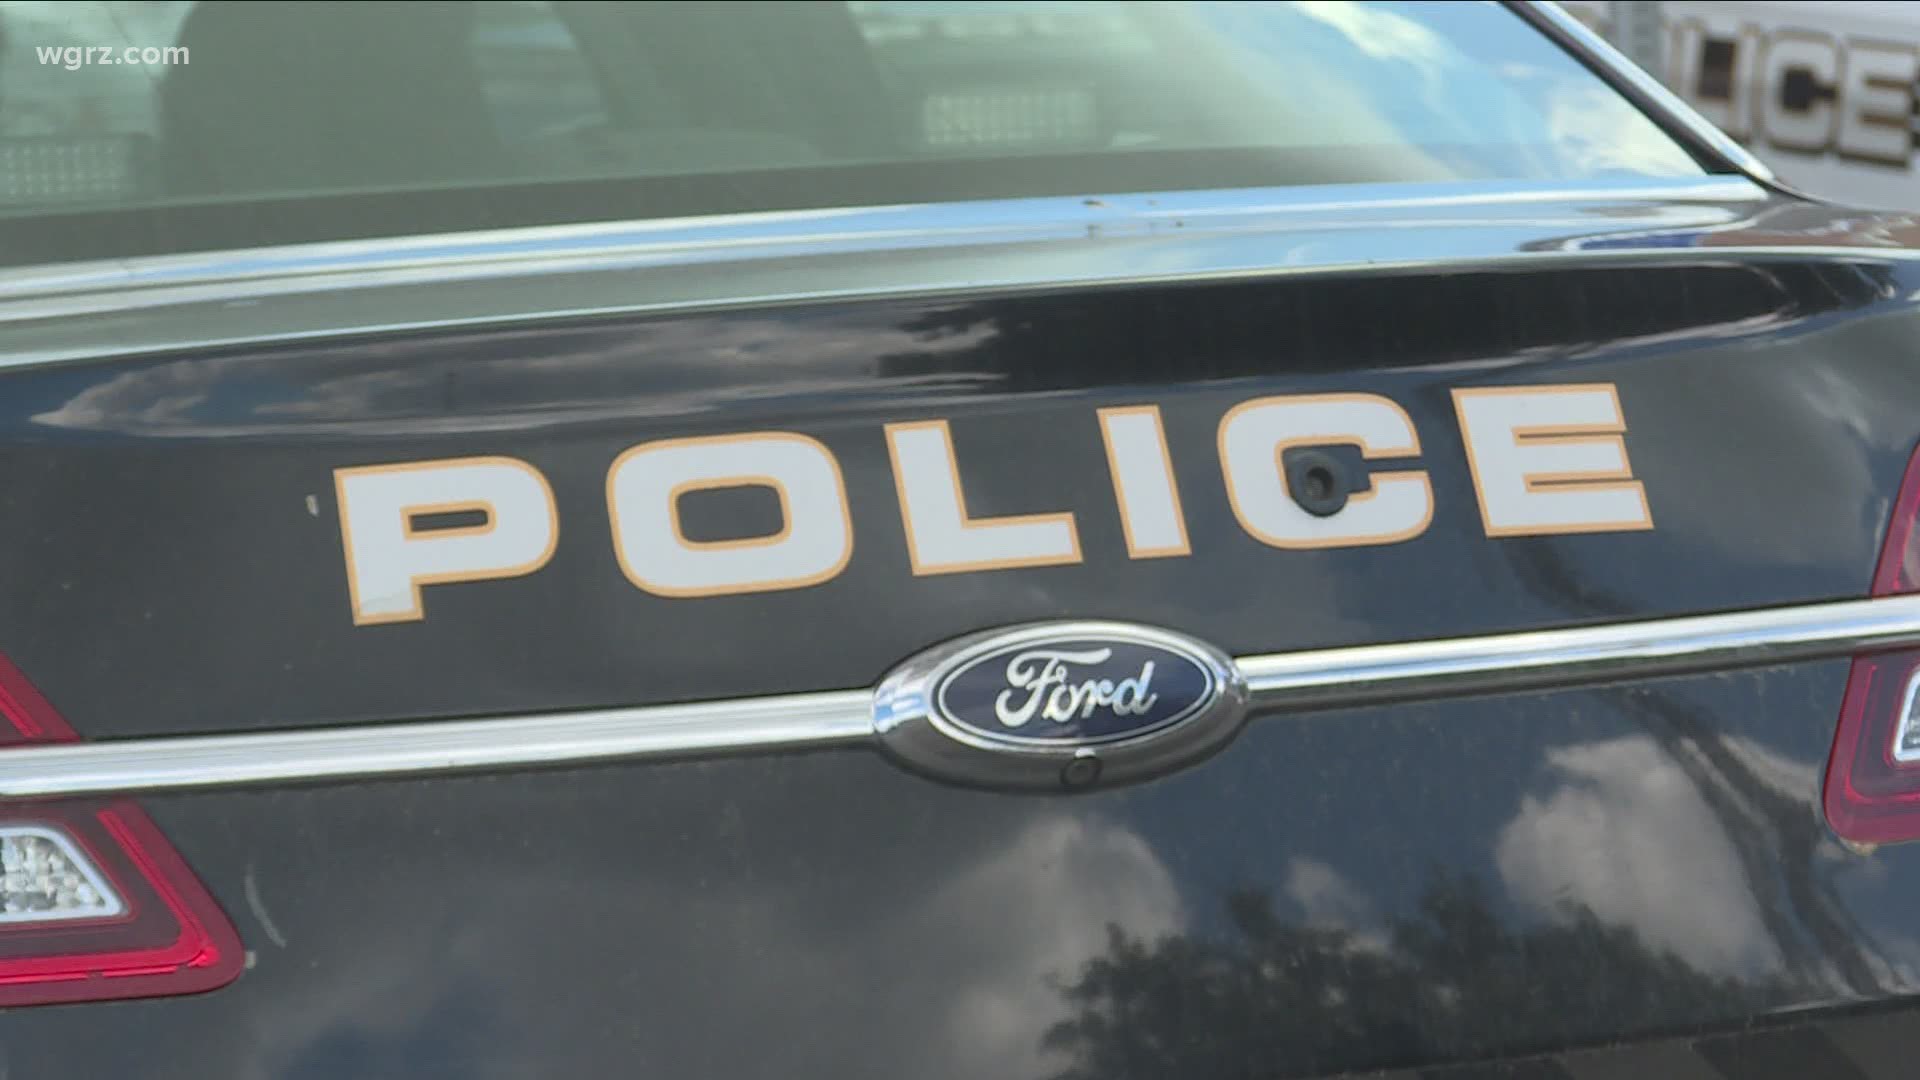 West Seneca Police says allegations were made regarding the demeanor of an officer who responded to a call at Planned Parenthood on Friday.